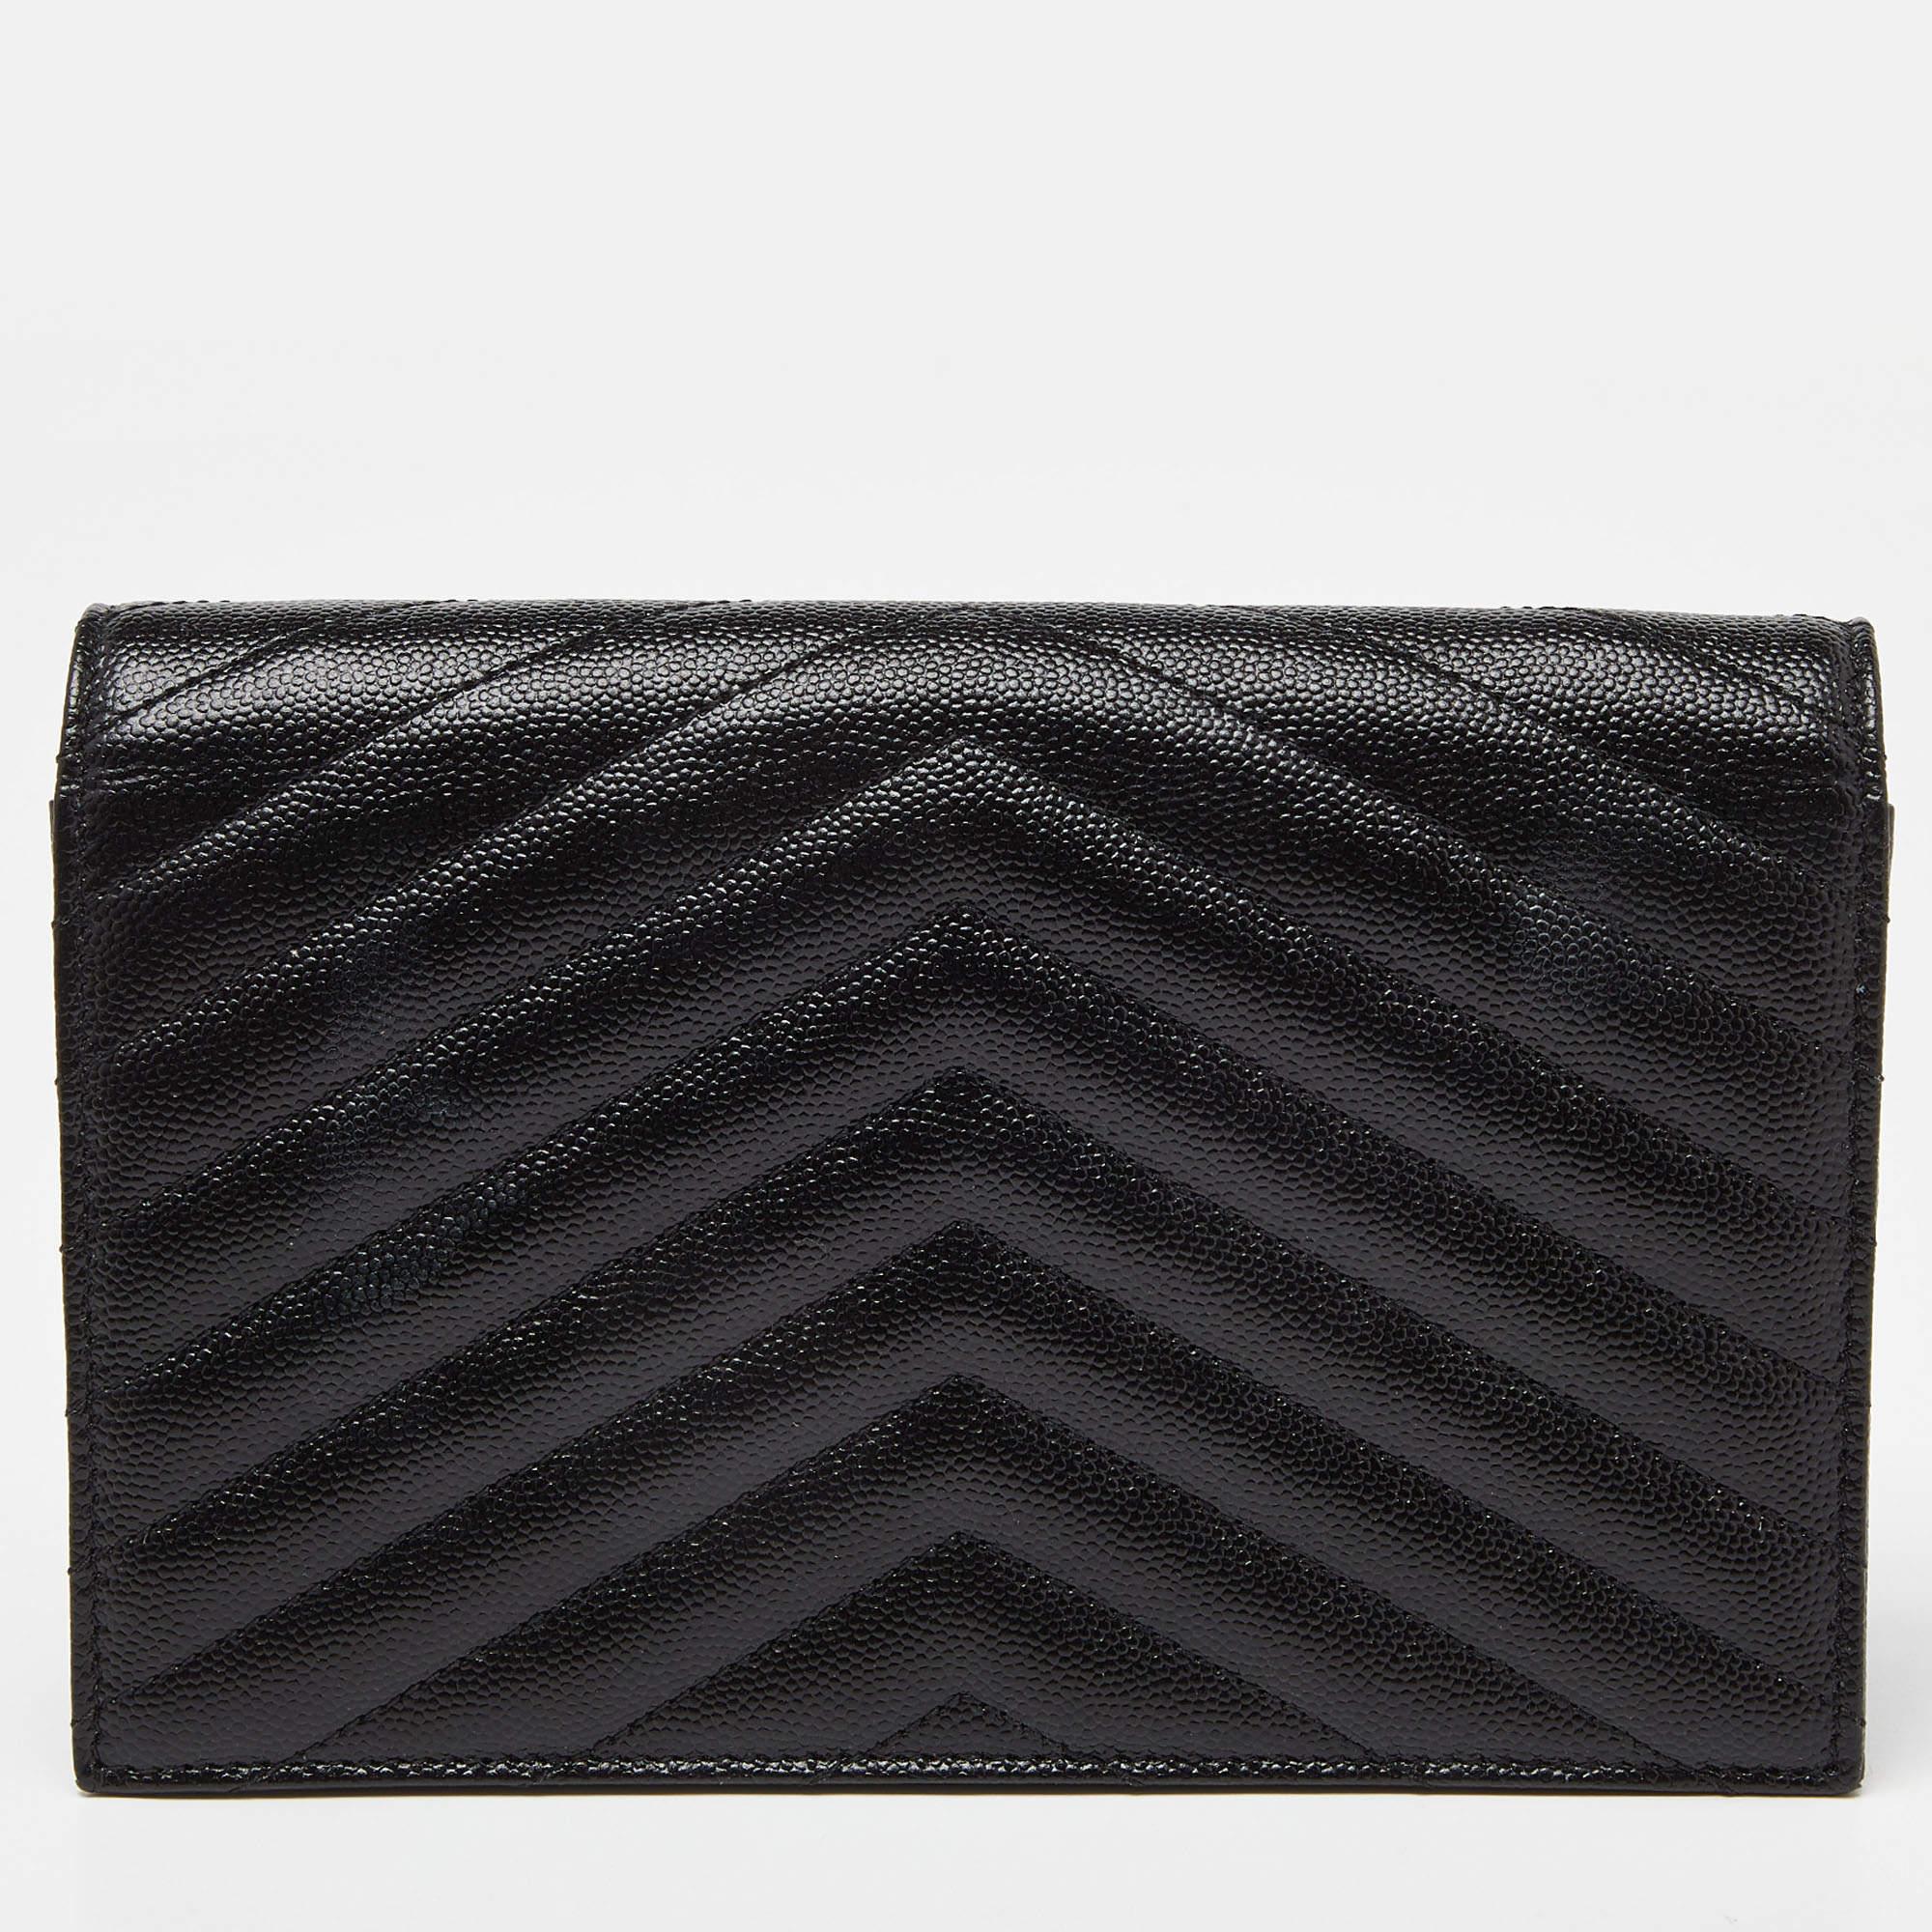 Fashioned using Matelassé leather into a structured silhouette, this Saint Laurent Monogram Envelope WOC has high style and a timeless charm. It has a flap design and the front is highlighted with a gold-tone YSL logo. The interior is lined with